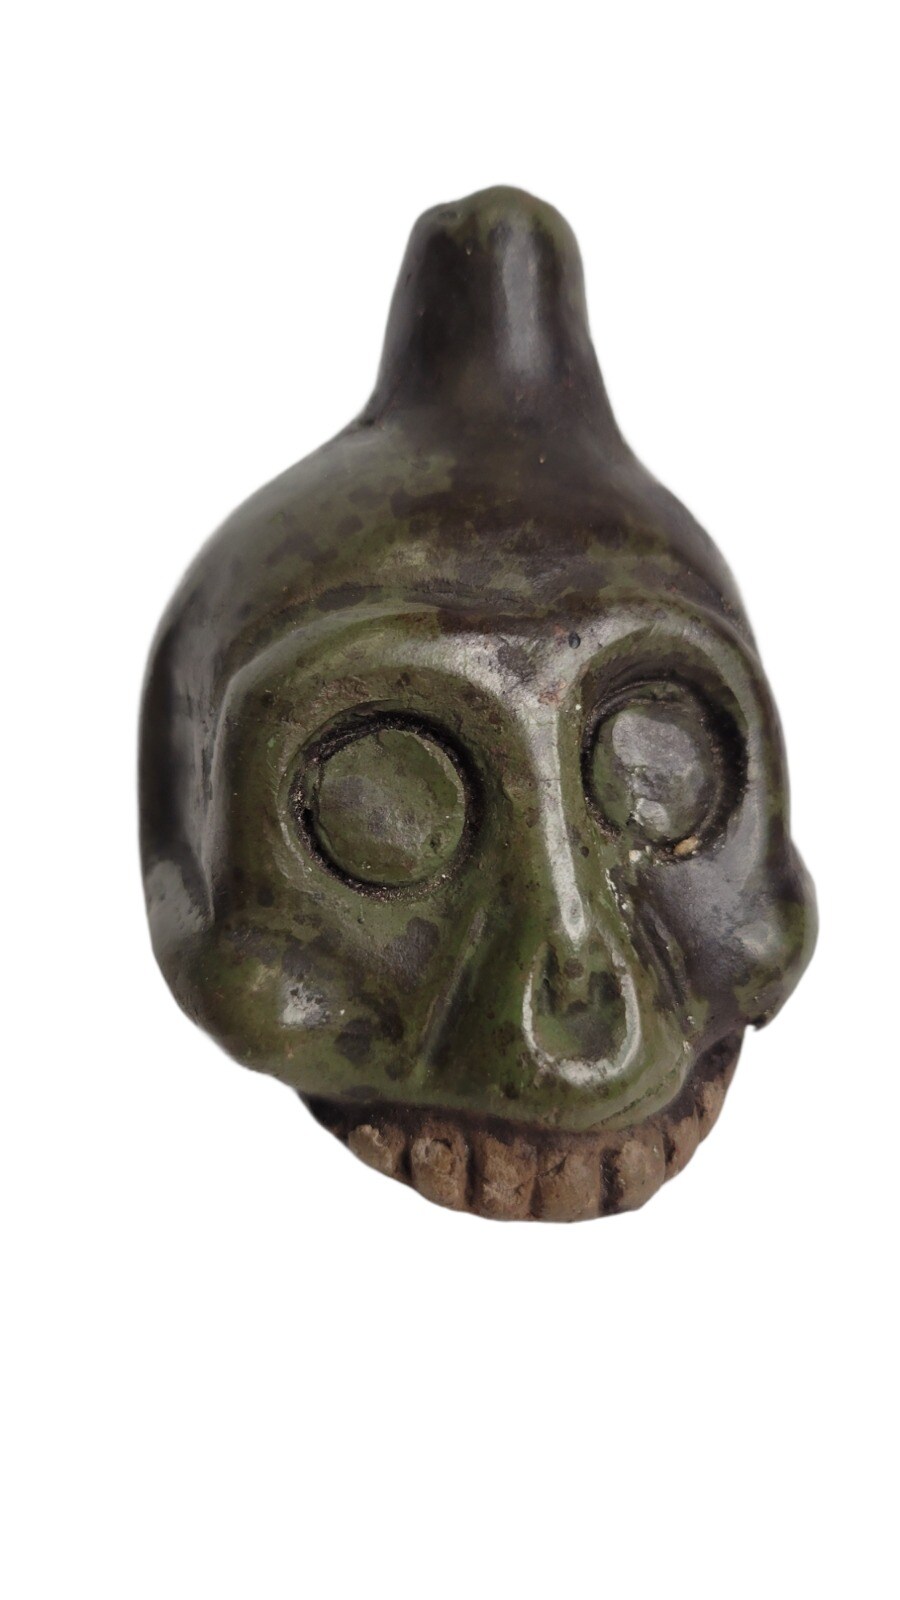 Aztec Death Whistle (Most Terrifying Instrument Ever?)